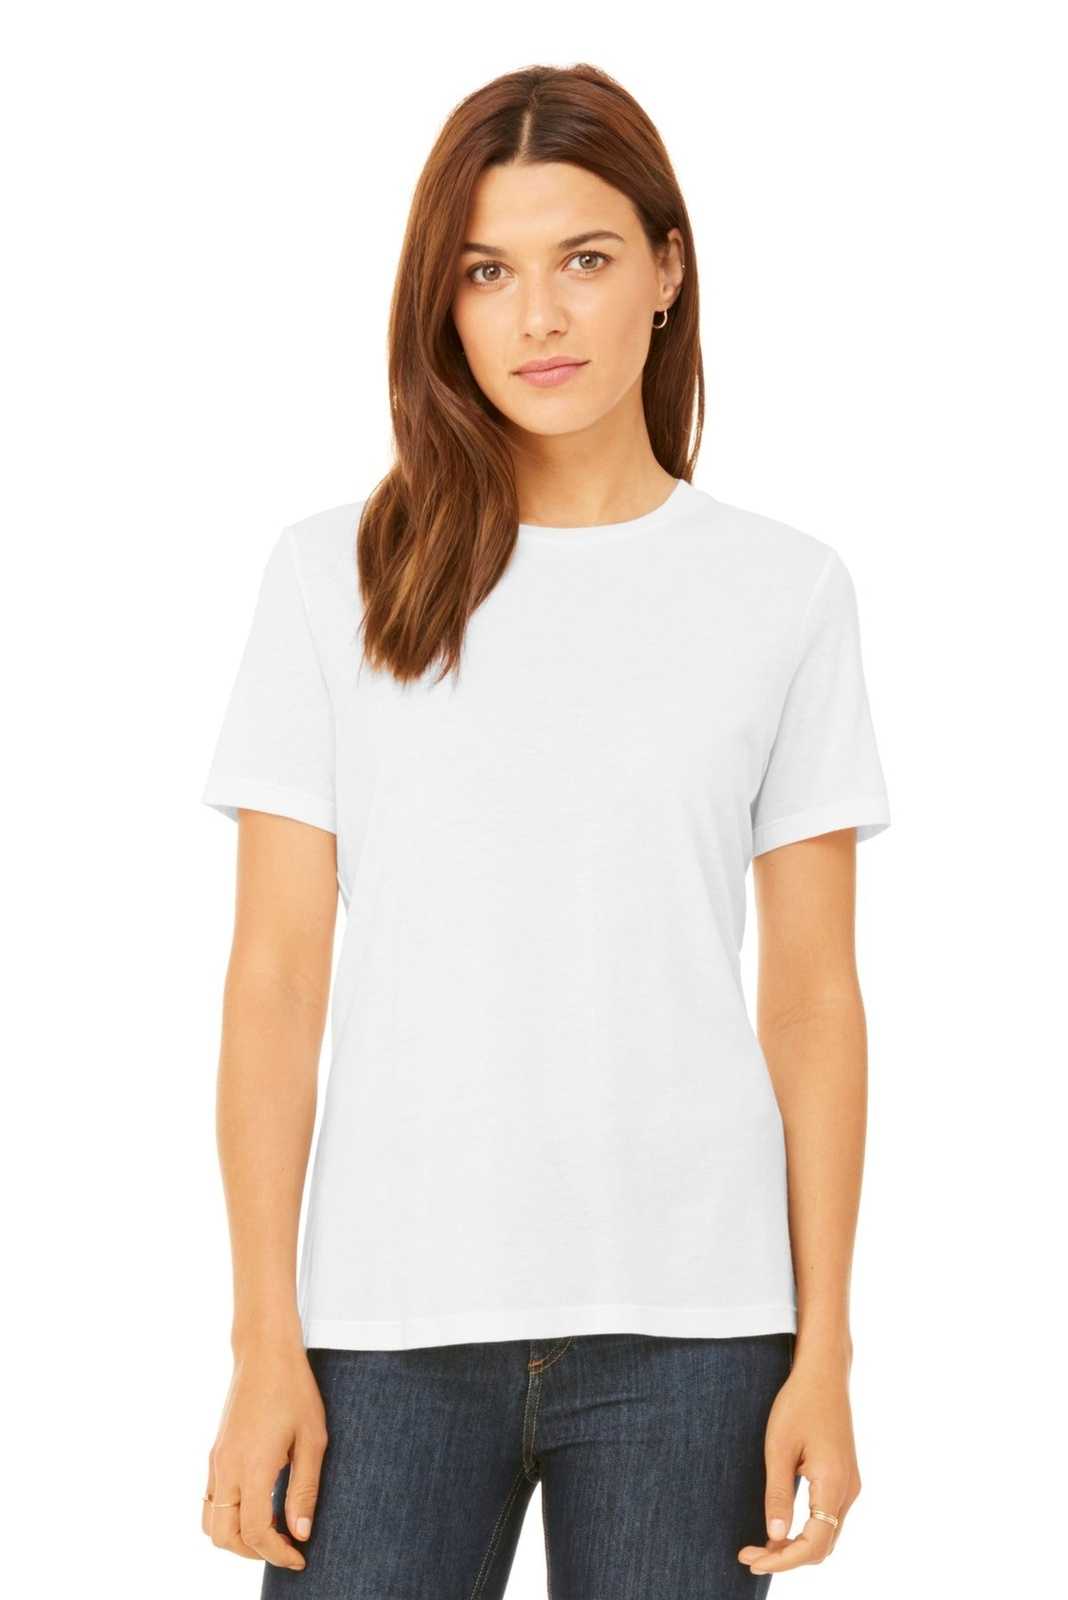 Bella + Canvas 6400 Women's Relaxed Jersey Short Sleeve Tee - White